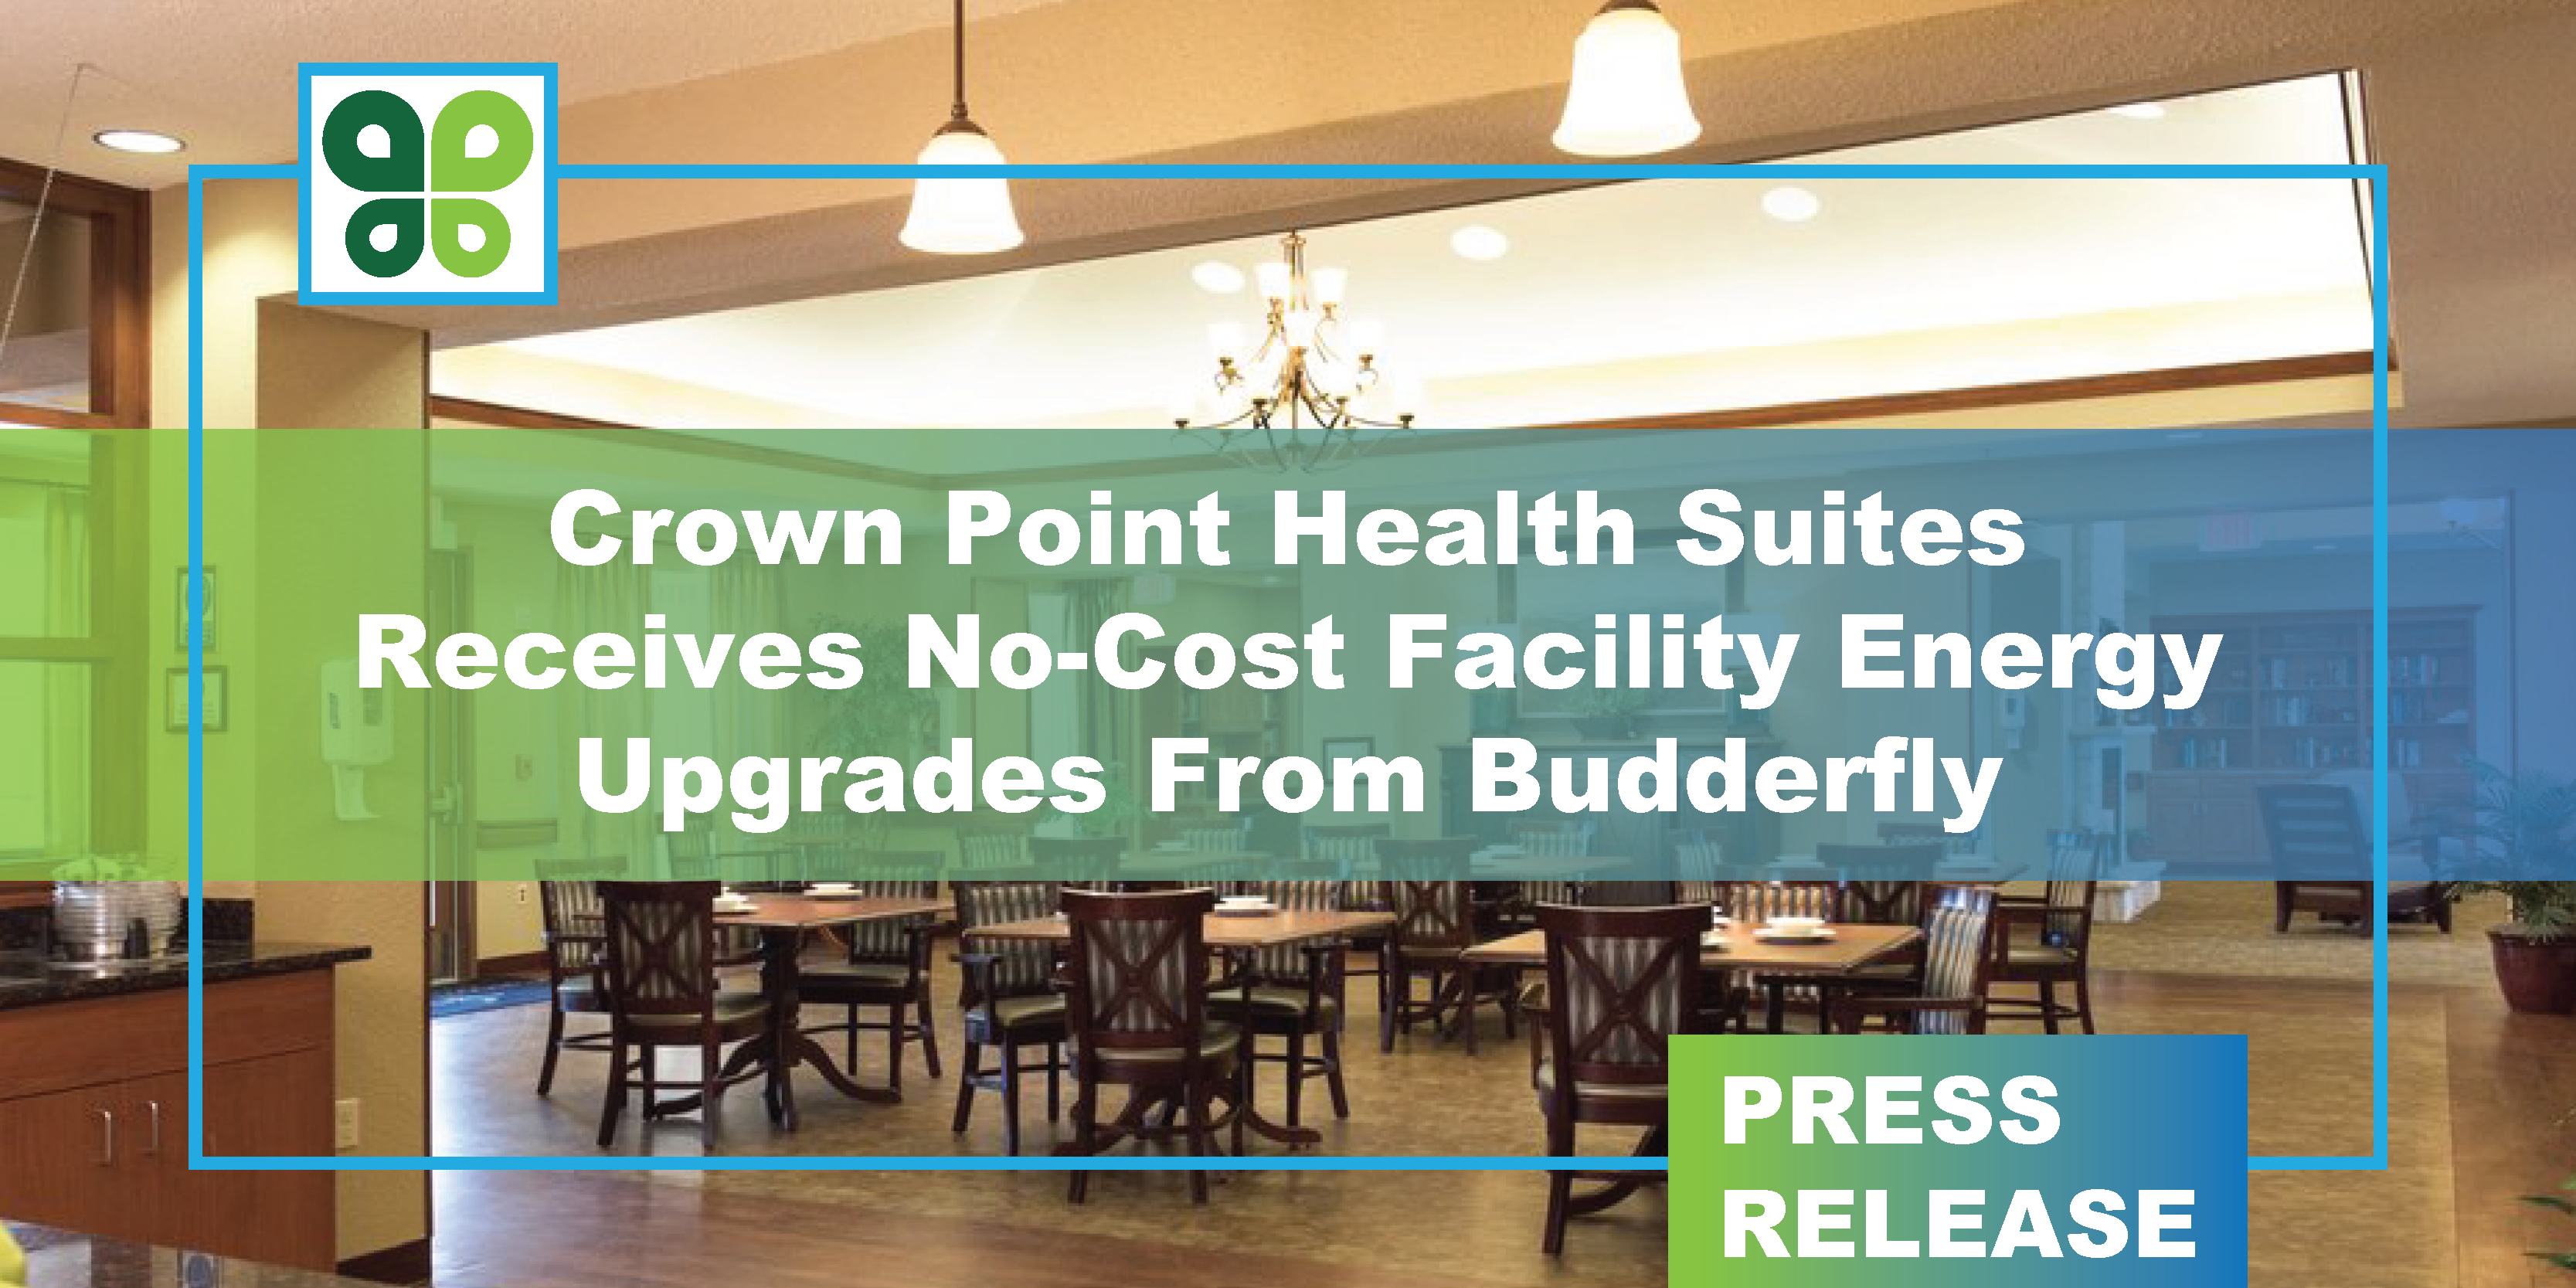 Crown Point Health Suites Receives No-Cost Facility Energy Upgrades From Budderfly